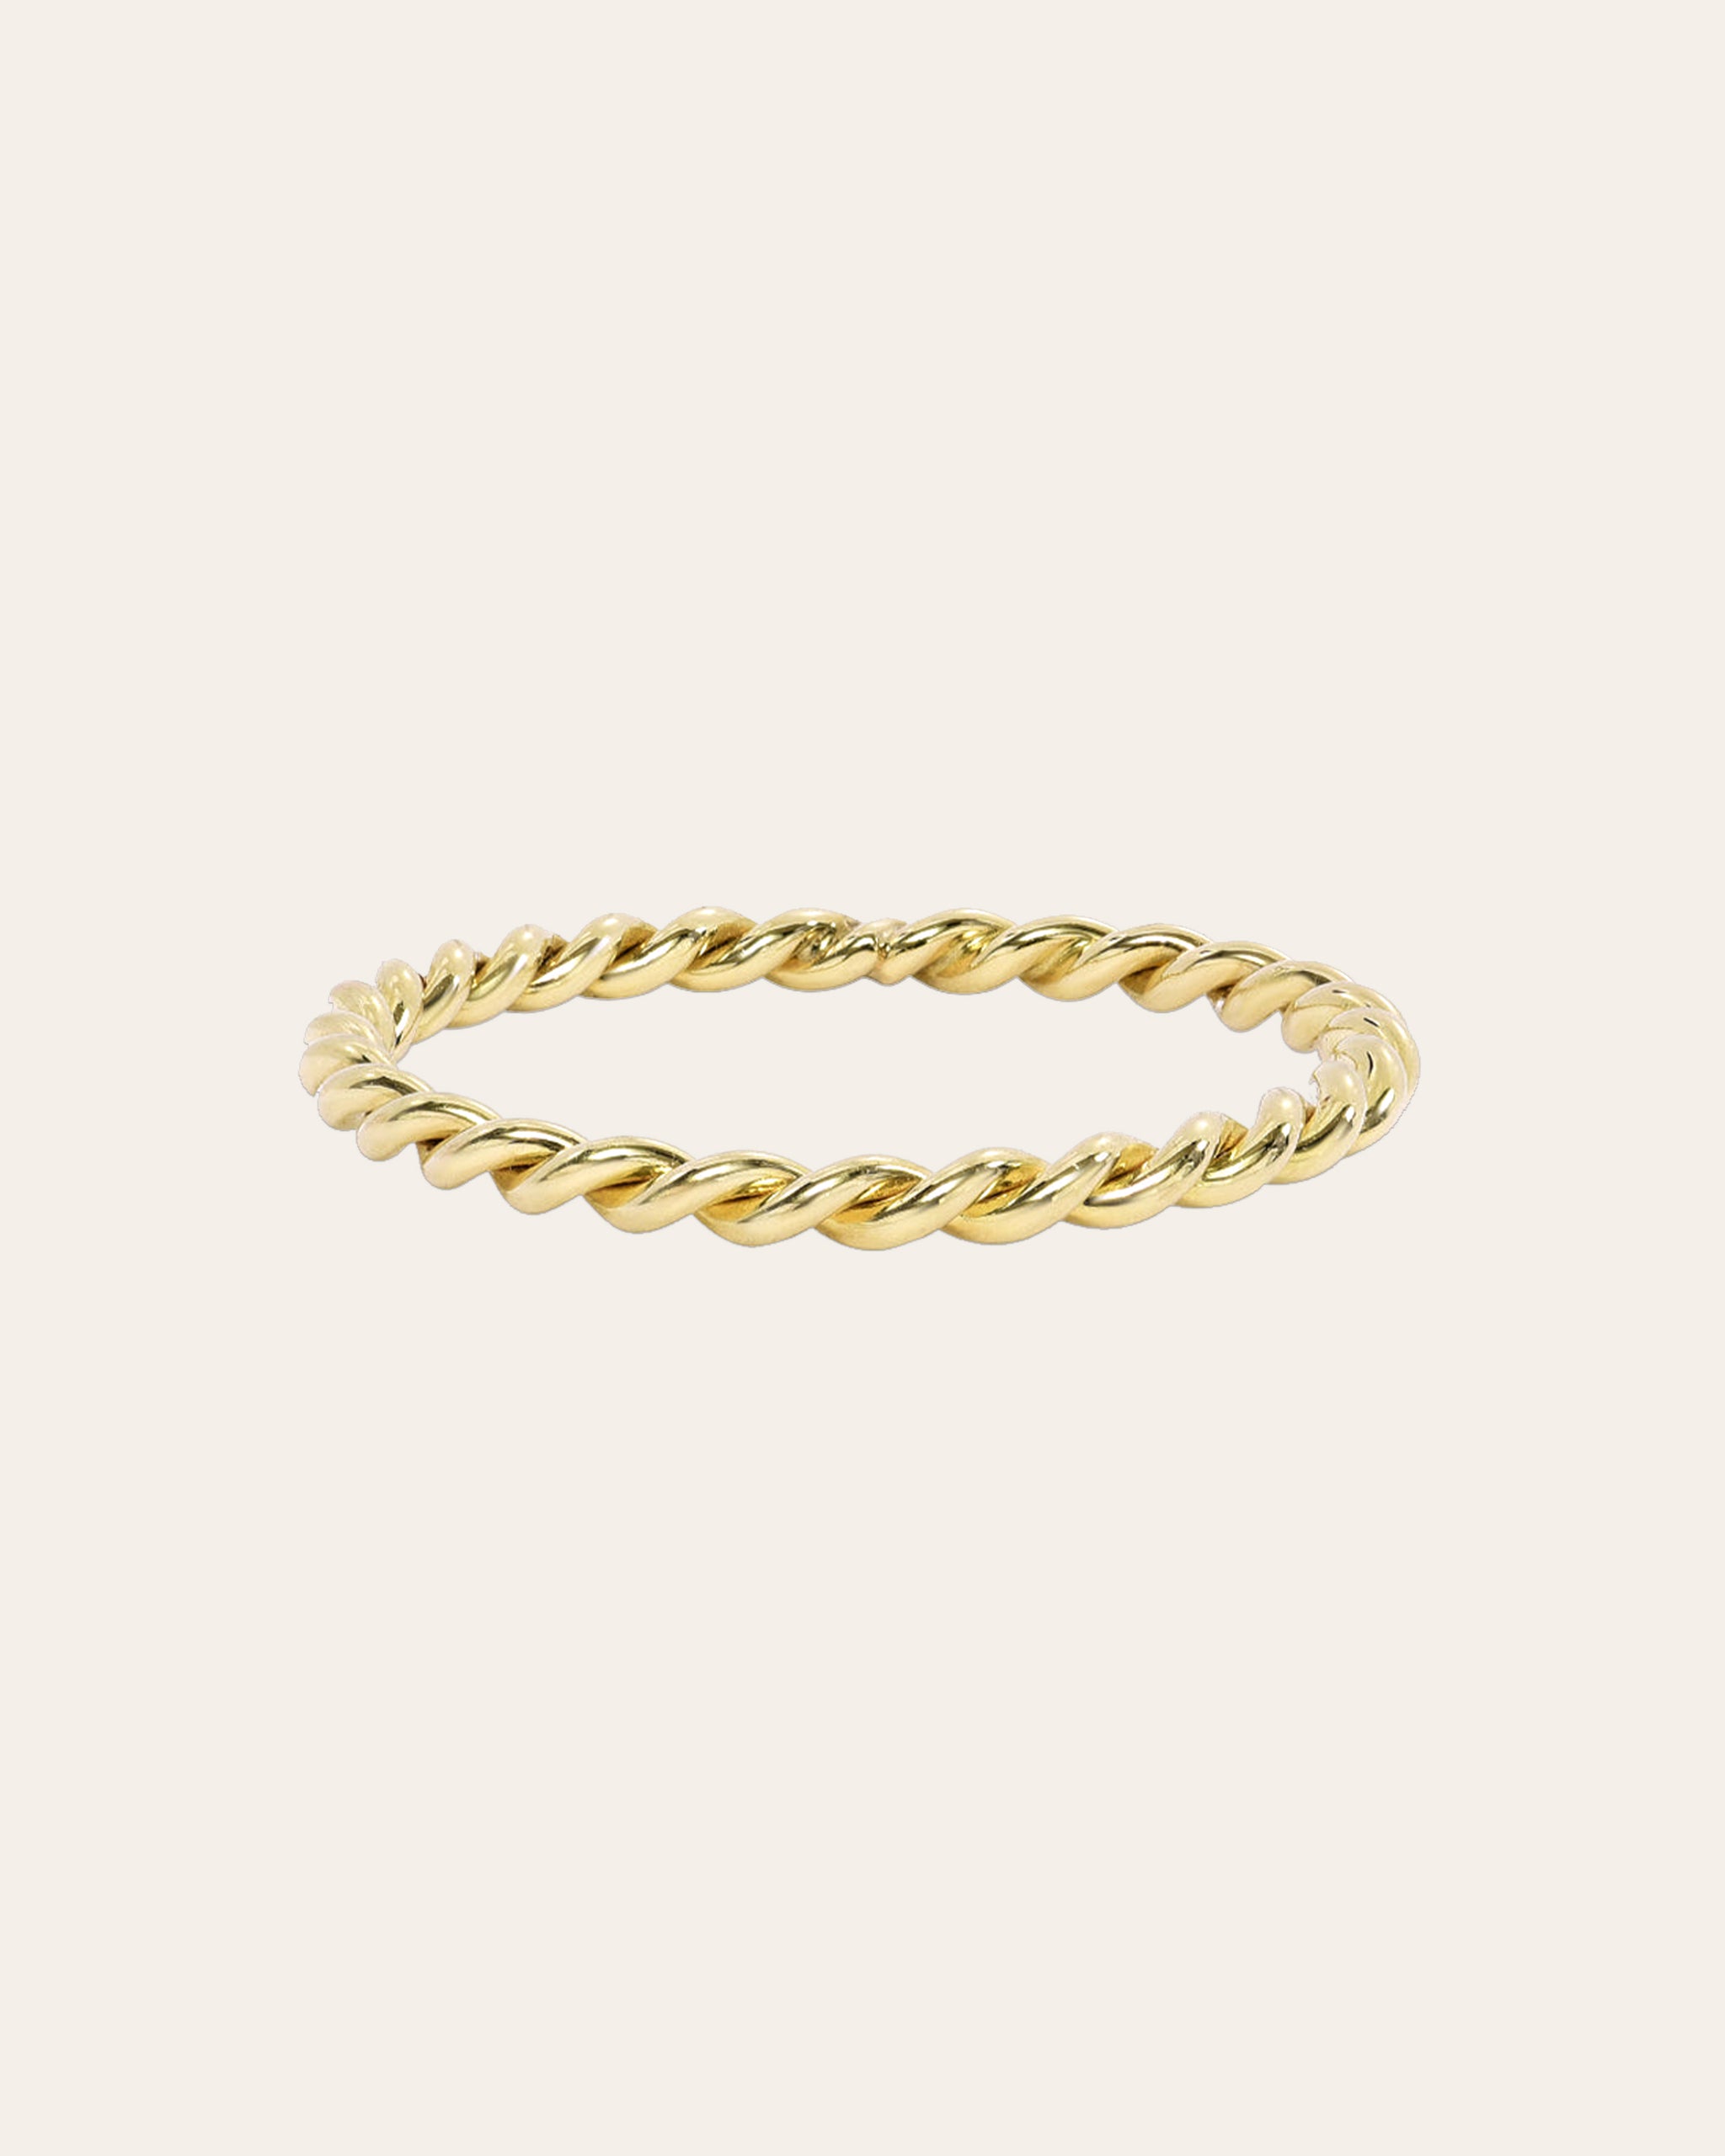 Buy Solid Gold Thin Twist Ring 24k, 22k, 18k, 14k, 9k Pure Yellow Gold  Women's Gold Stacker Ring Handmade Natural Minimalist Jewellery Online in  India - Etsy